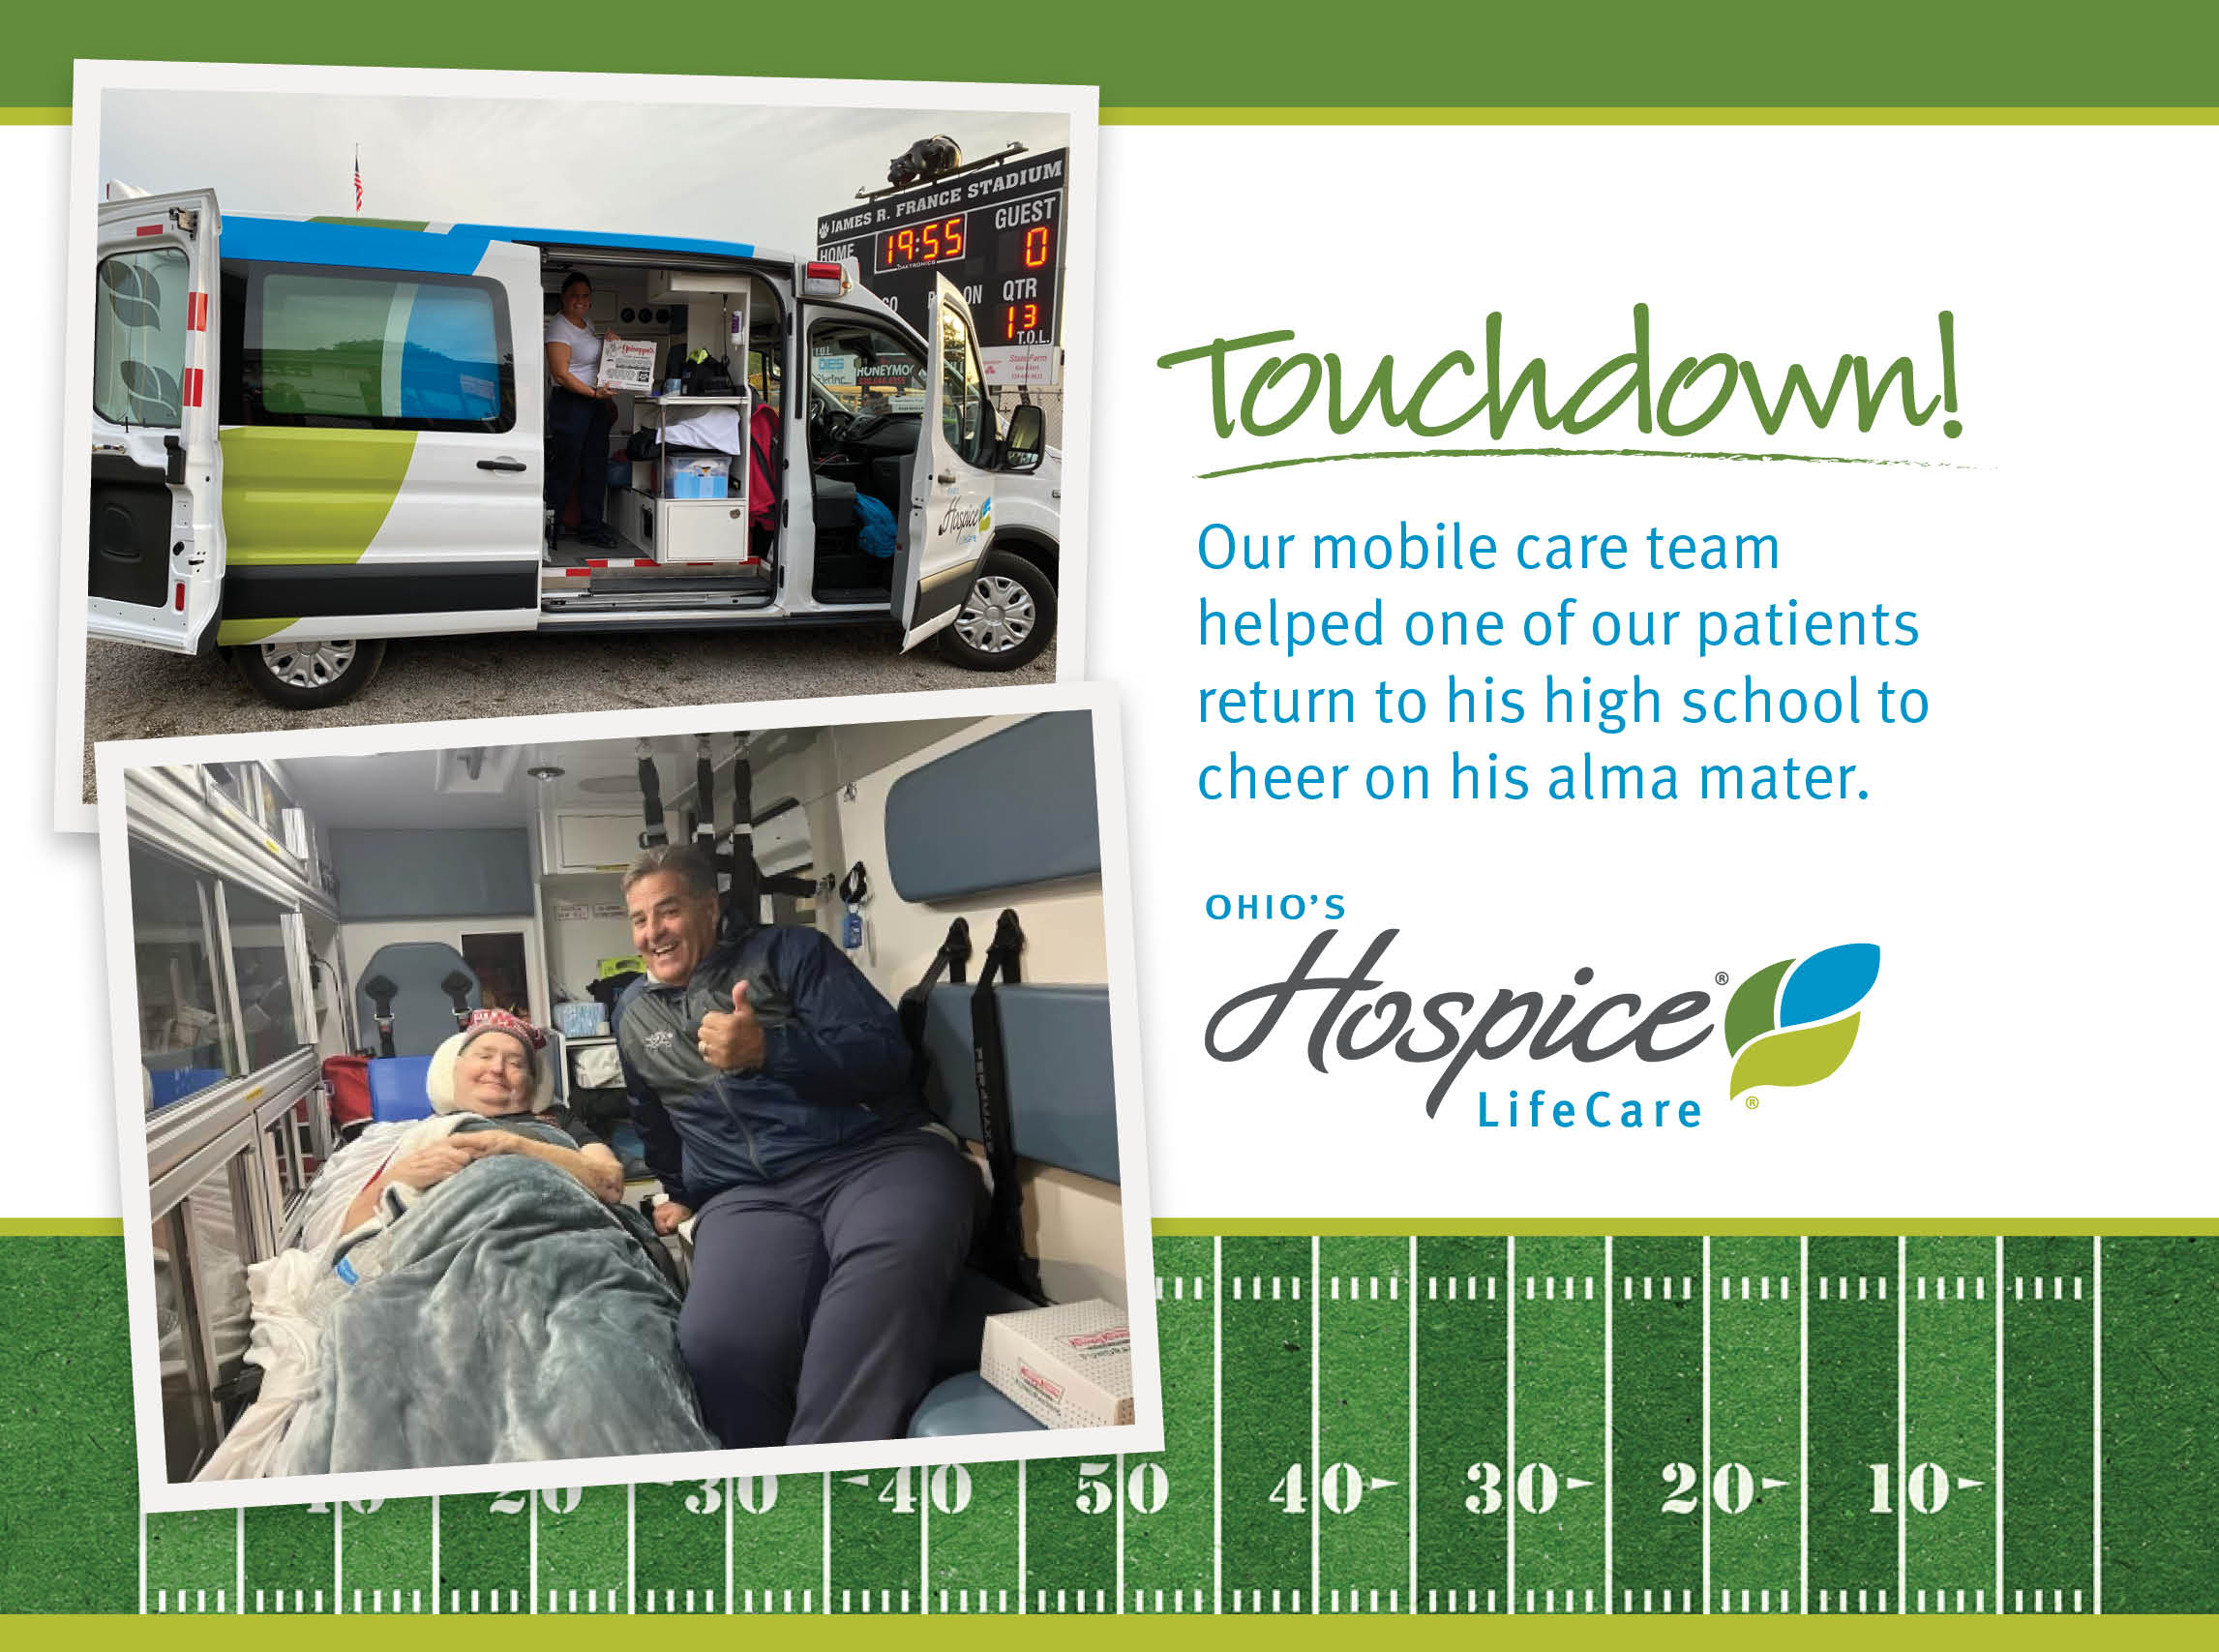 Touchdown! Our mobile care team helped one of our patients return to his high school to cheer on his alma mater.